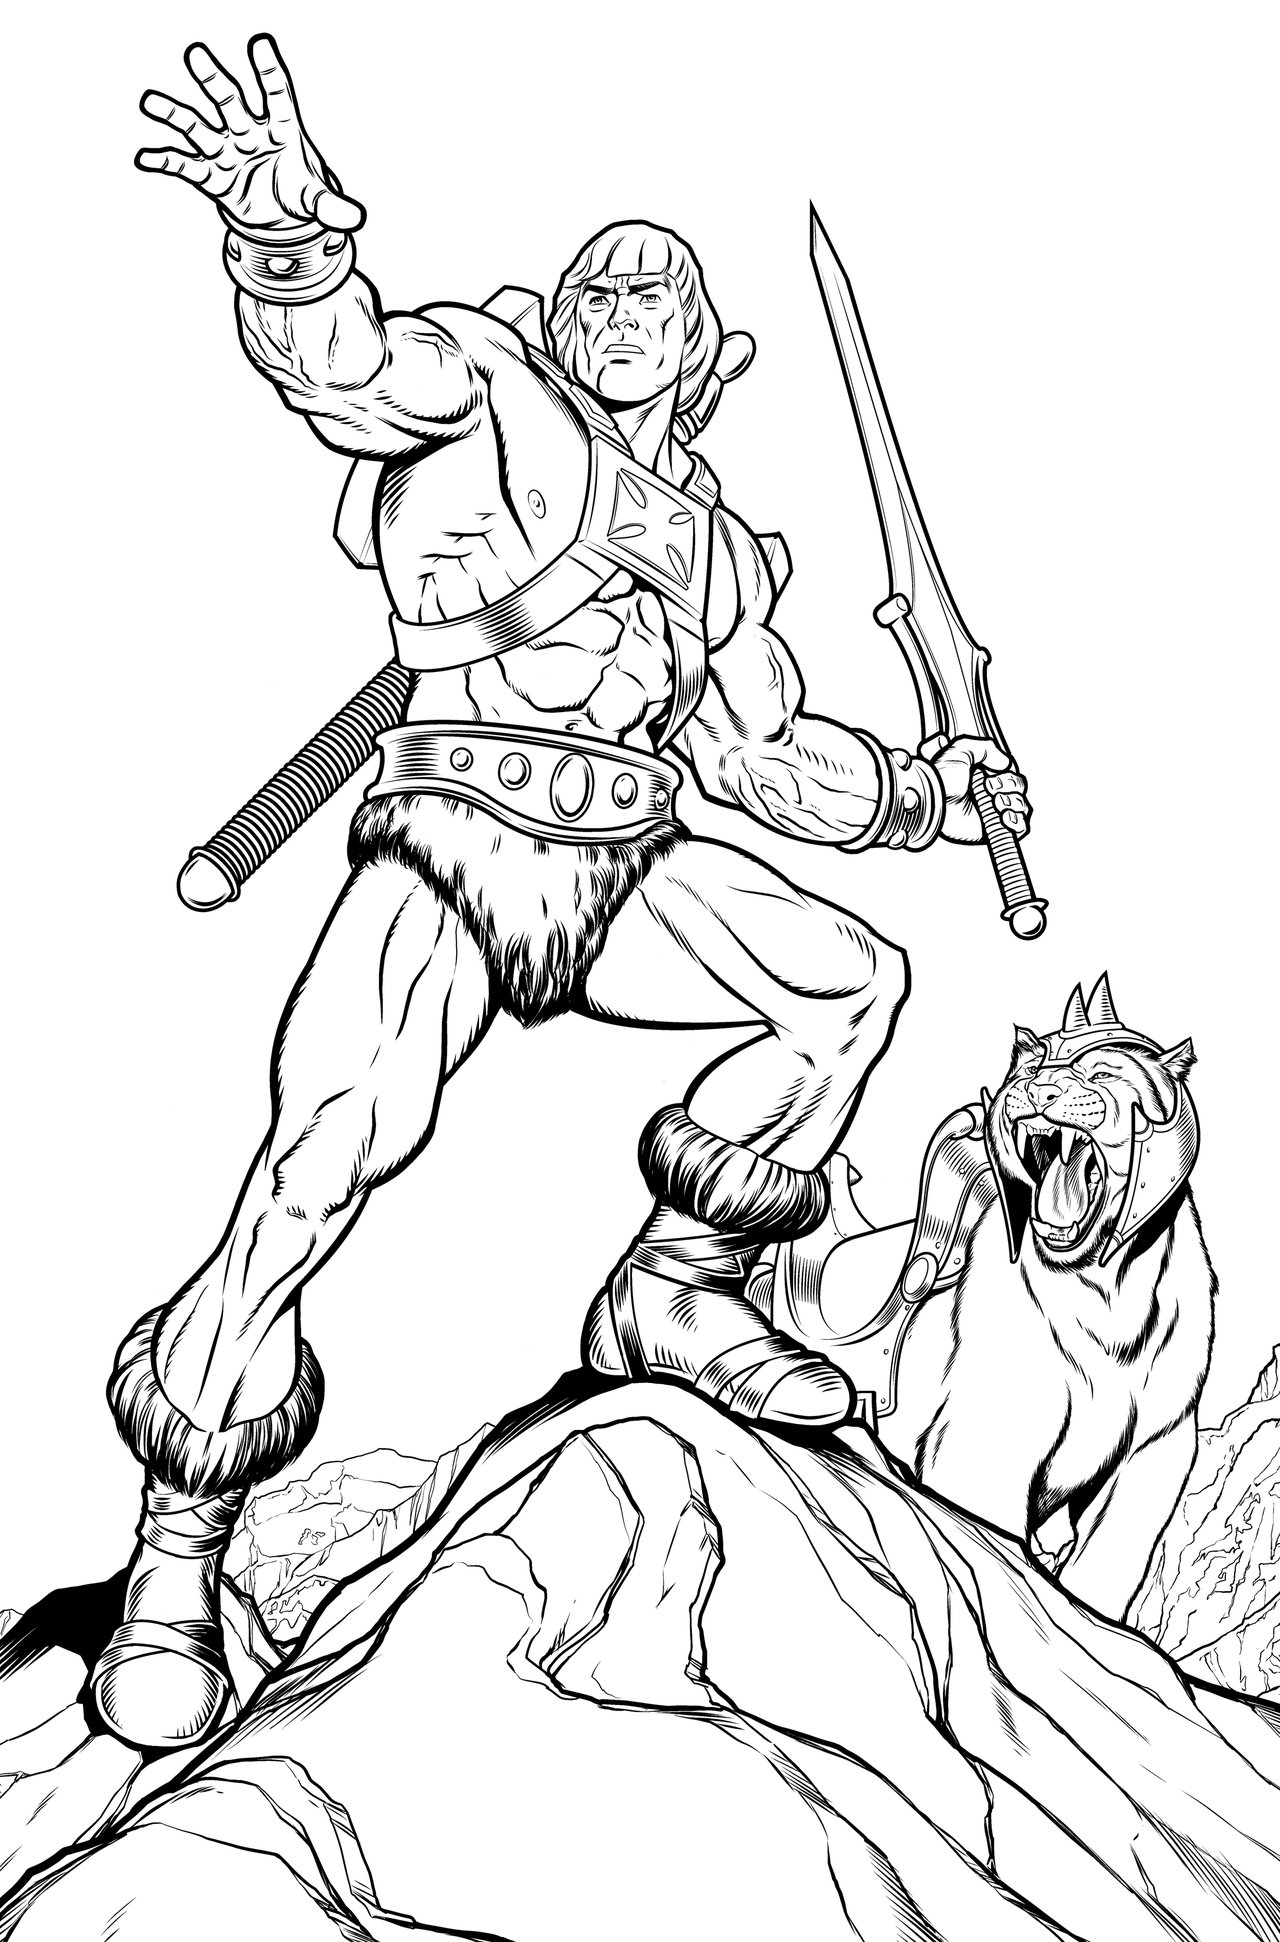 he-man-coloring-book-pages-sketch-coloring-page